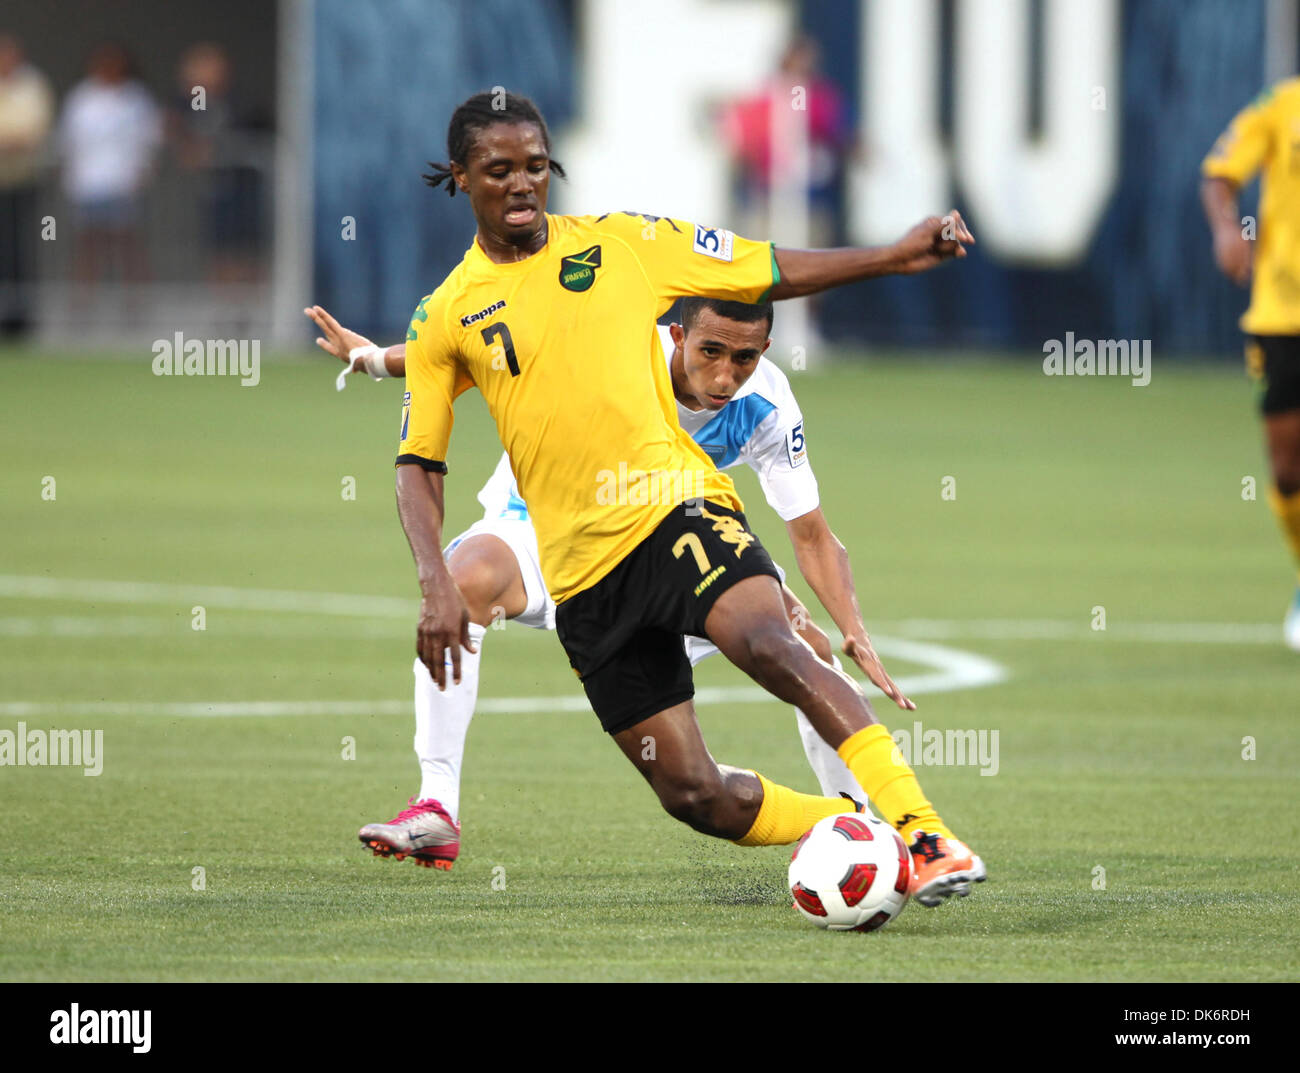 June 10, 2011 - Miami, Florida, U.S - Jamaica midfielder Jason Morrison #7 in action during the 2011 CONCACAF Gold Cup game between Jamaica and Guatemala at FIU Stadium in Miami, Florida. (Credit Image: © Luis Blanco/Southcreek Global/ZUMApress.com) Stock Photo